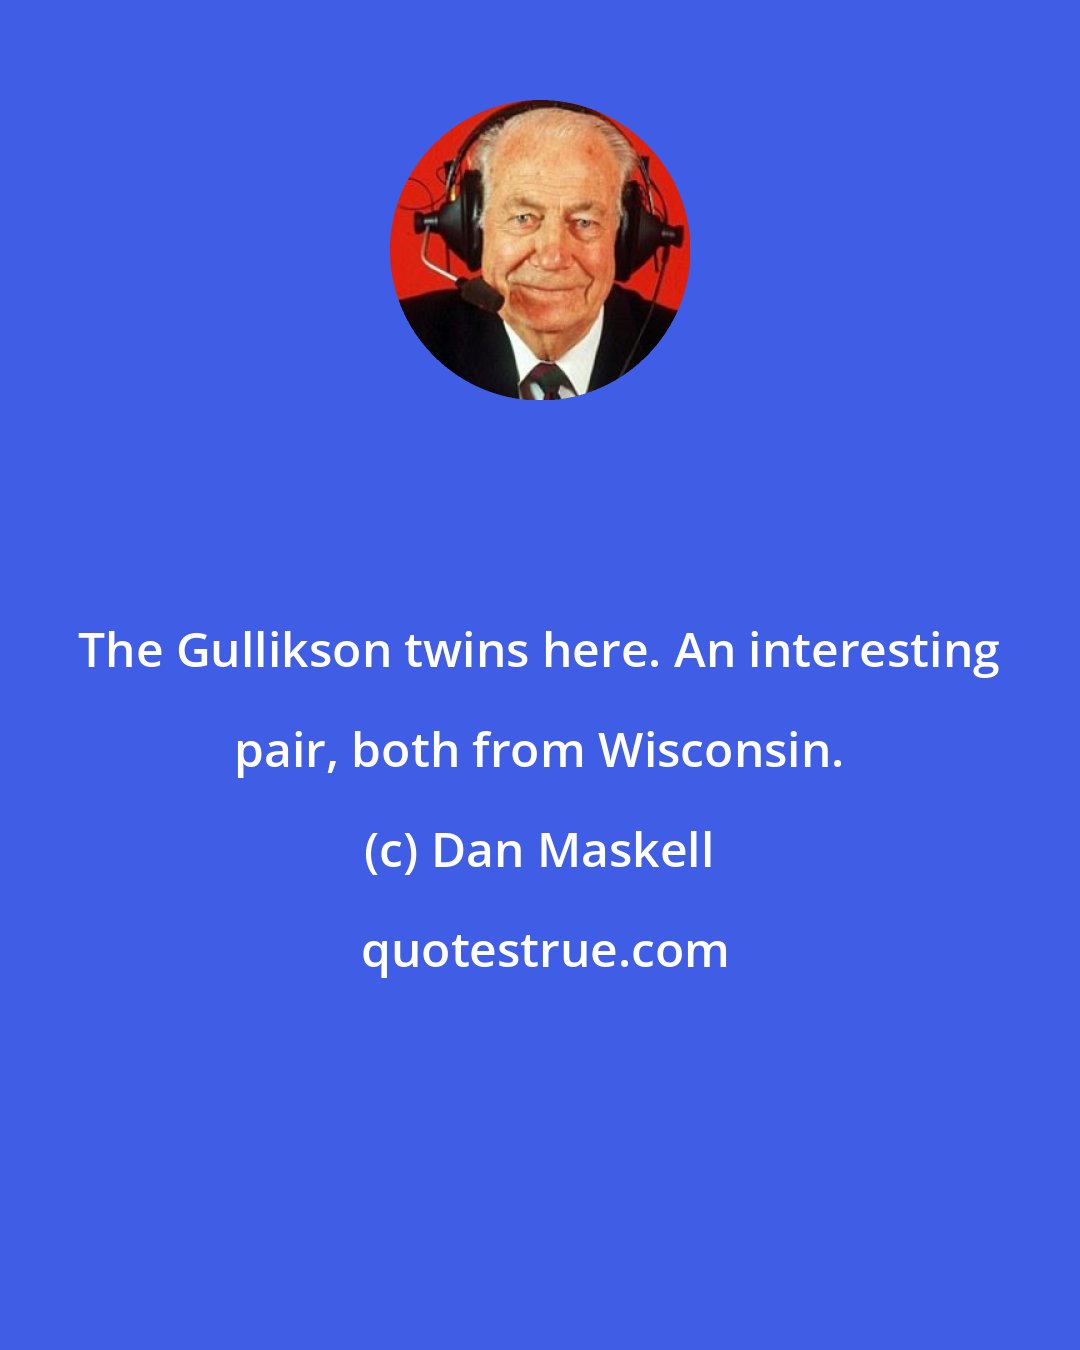 Dan Maskell: The Gullikson twins here. An interesting pair, both from Wisconsin.